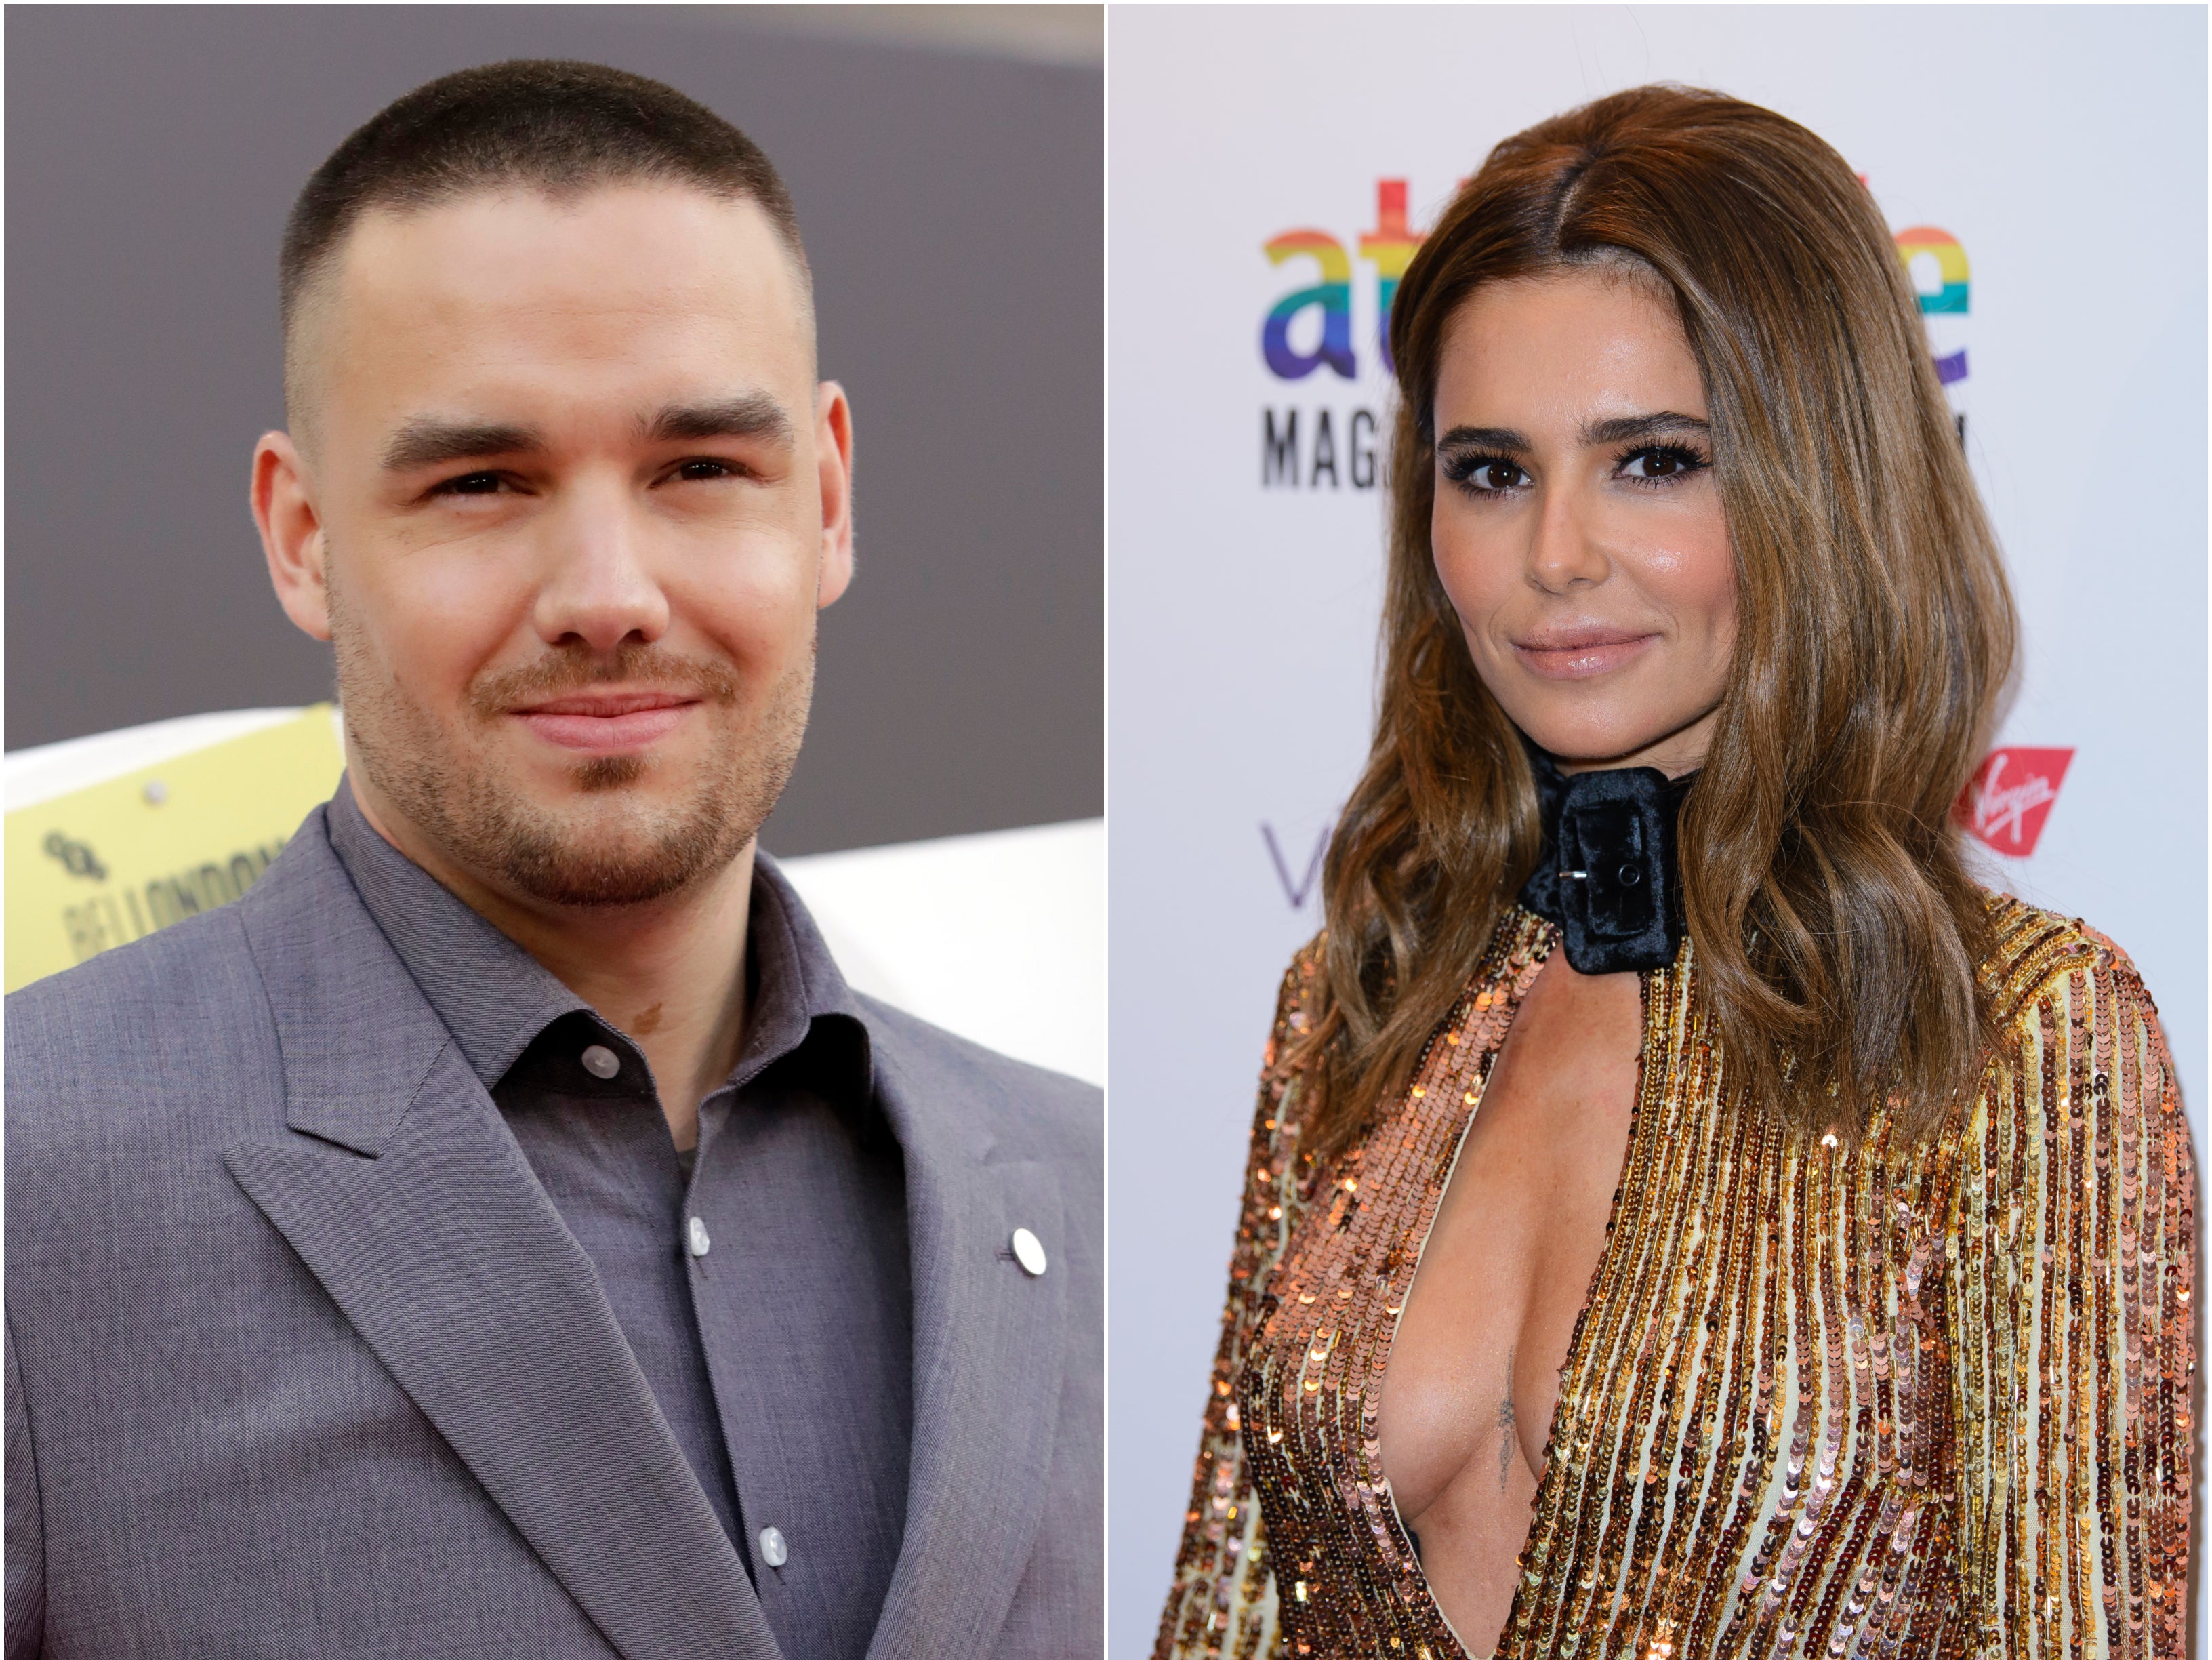 Cheryl and Liam met on The X Factor in 2008